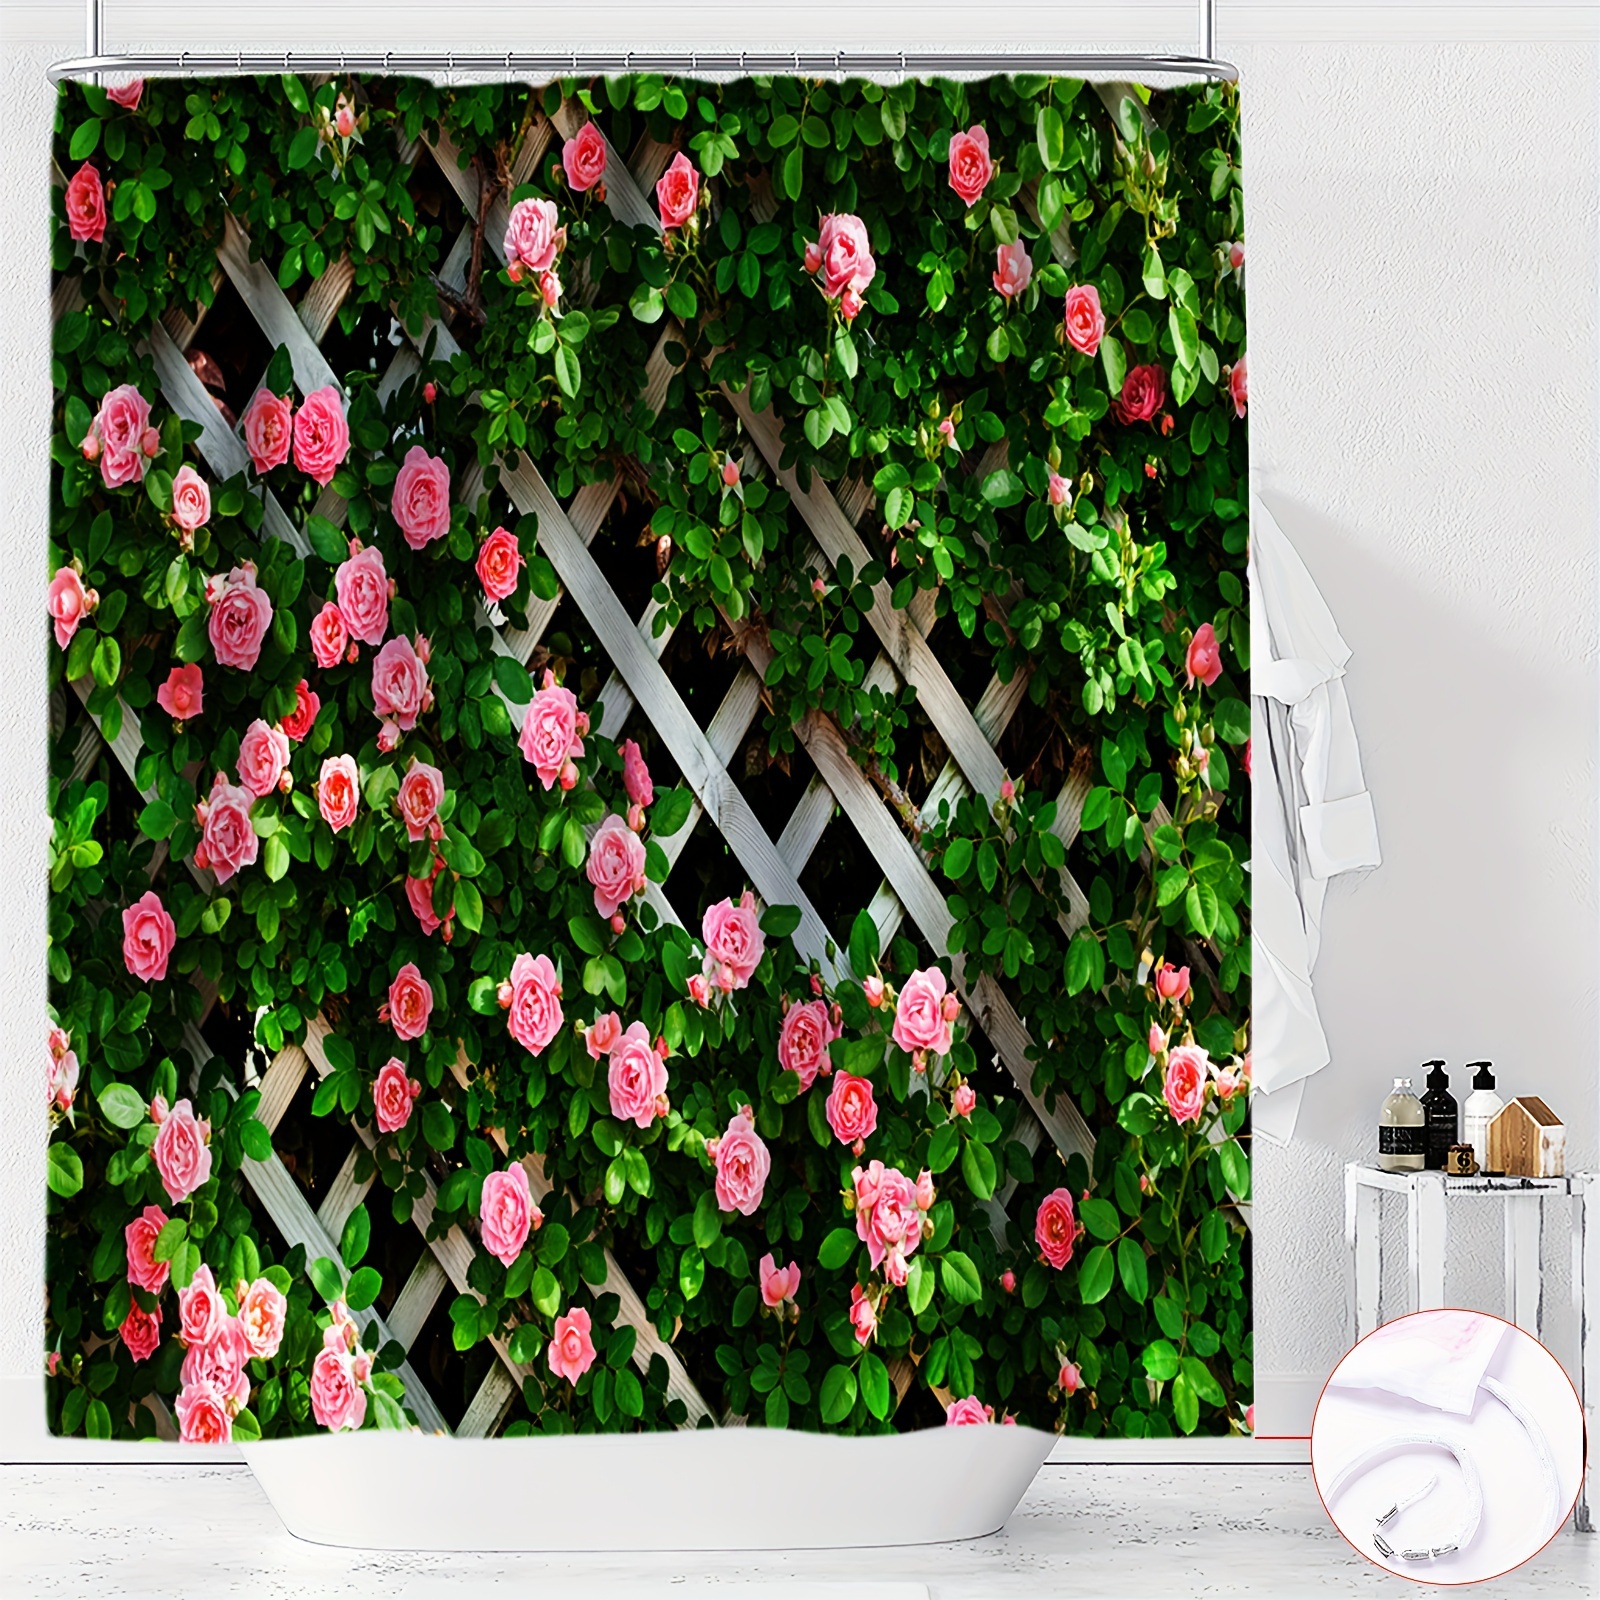 

Charming Pink Floral & Green Leaf Garden Fence Design Shower Curtain - Waterproof, Machine Washable Polyester With Hooks Included - Perfect For All Seasons Bathroom Decor